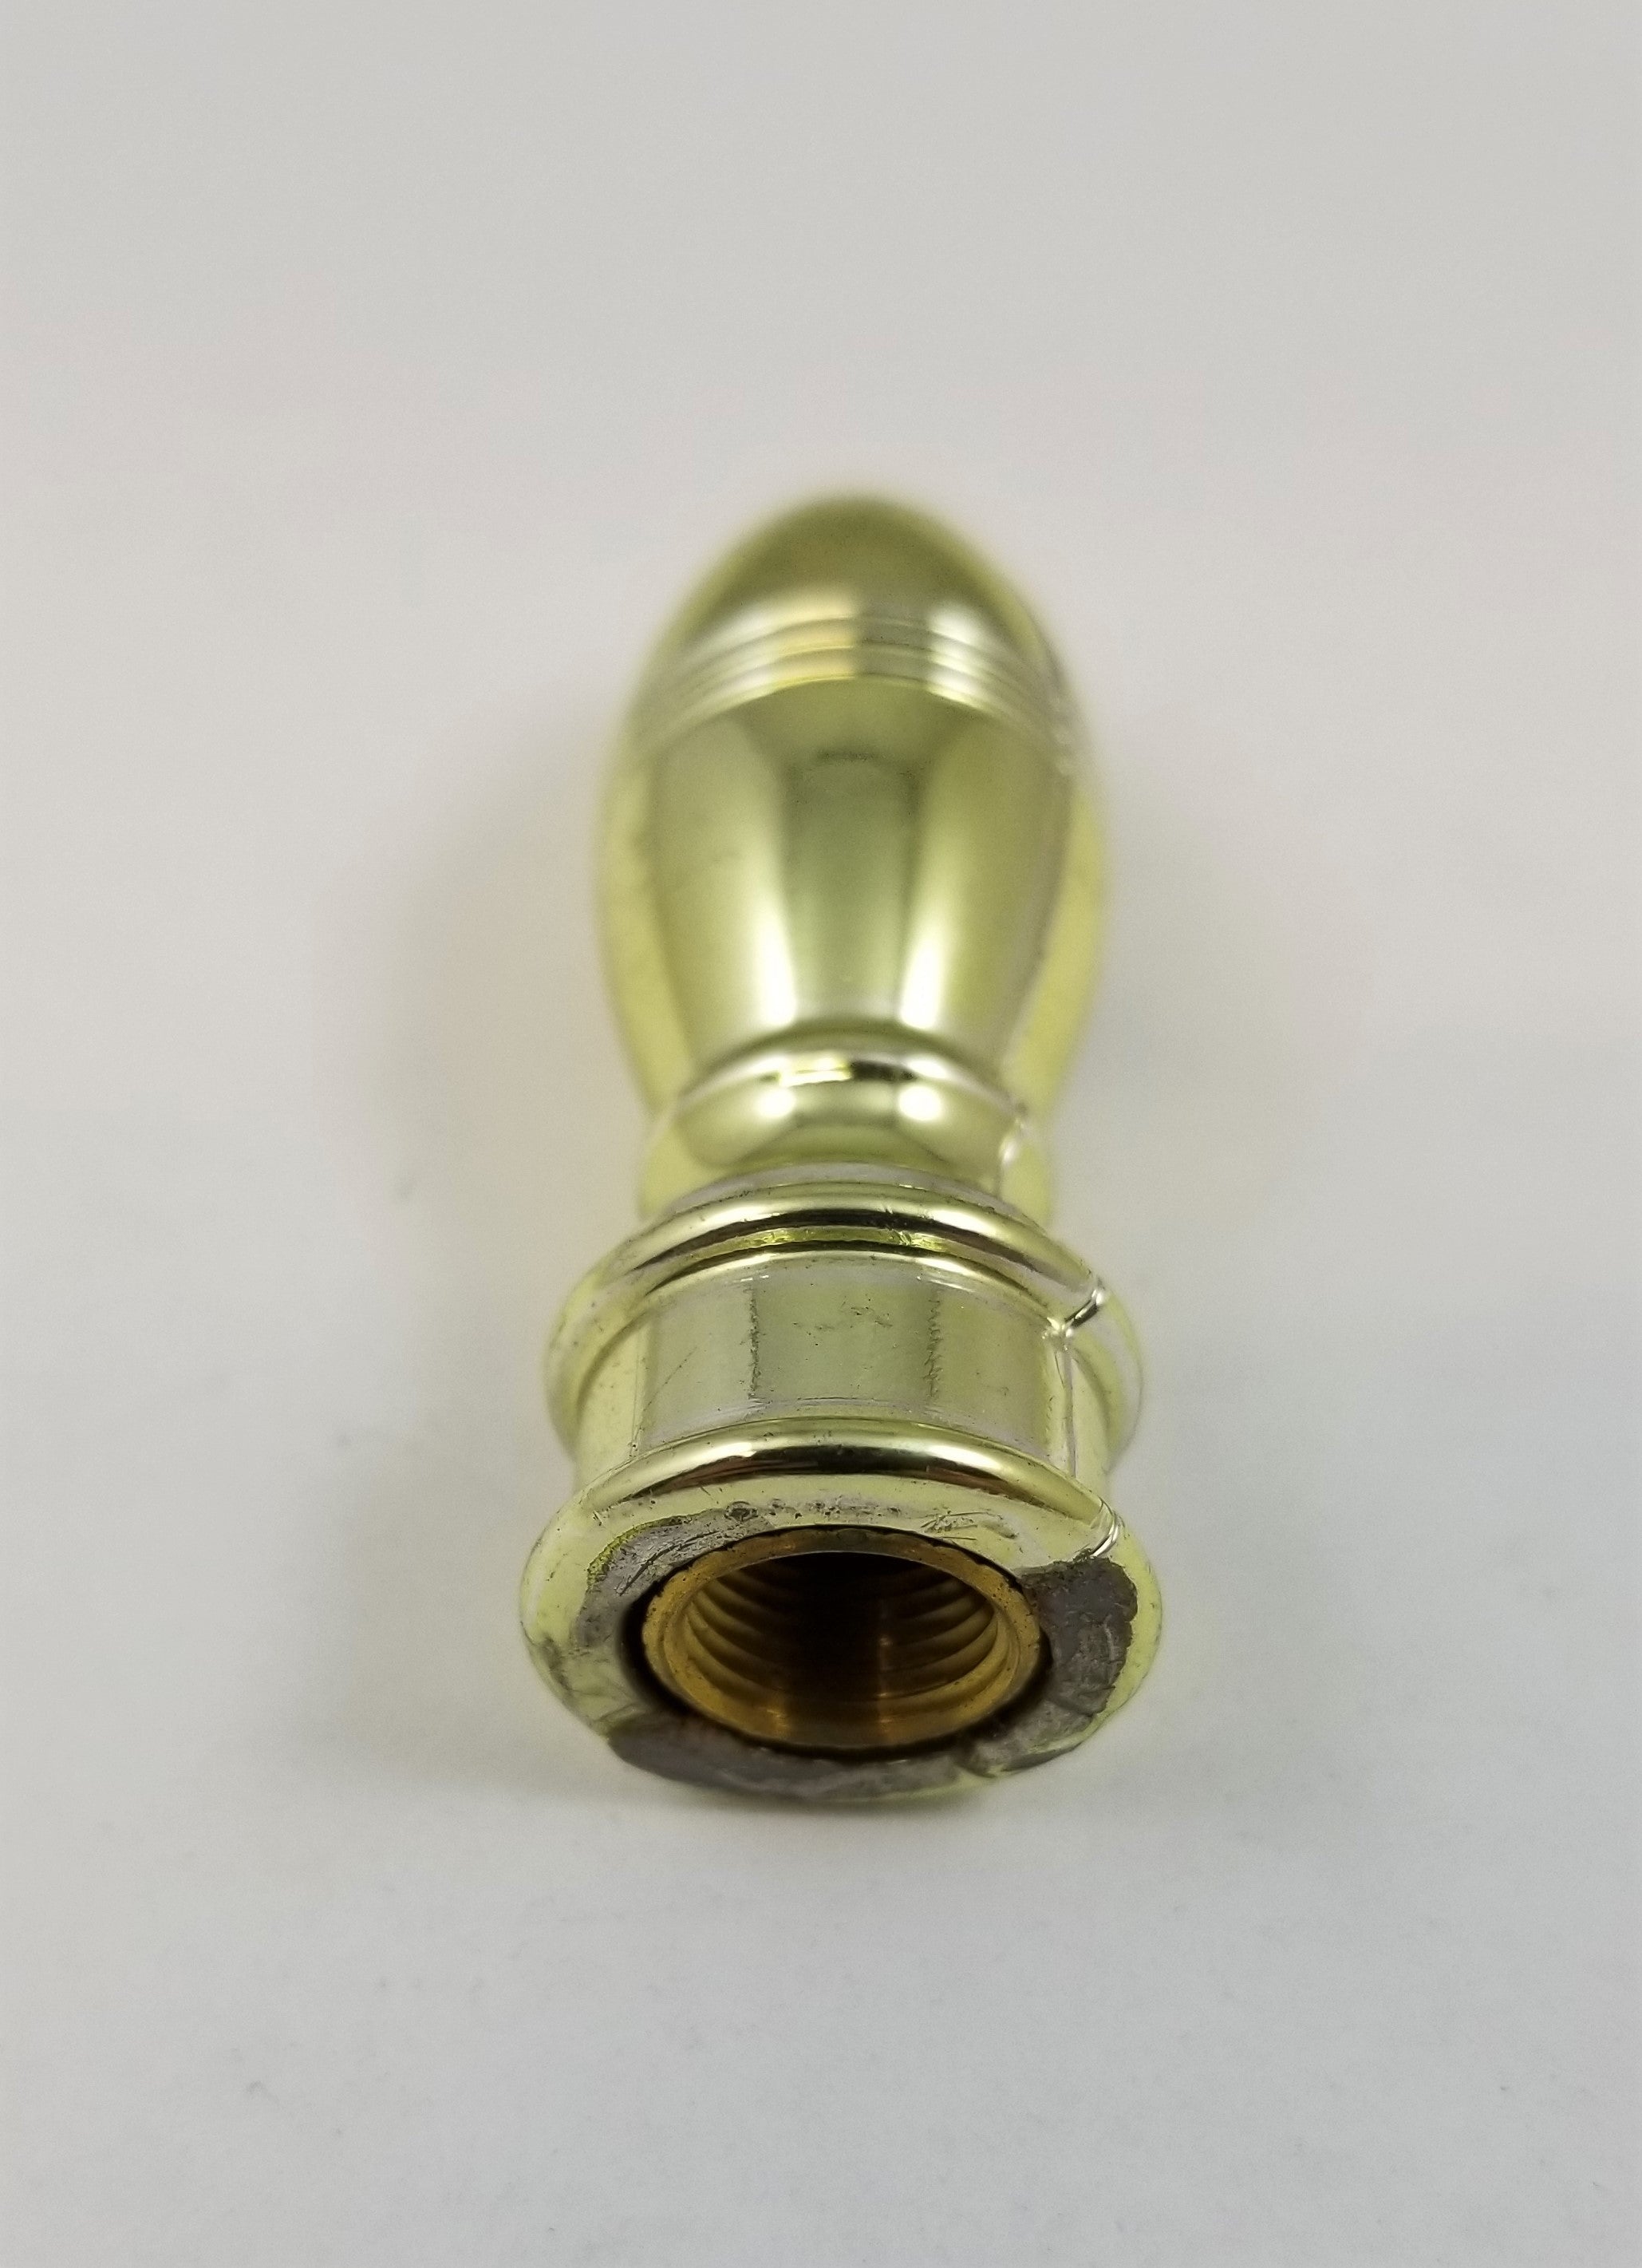 Plastic Finial in Brass- tapped 1/8 IP